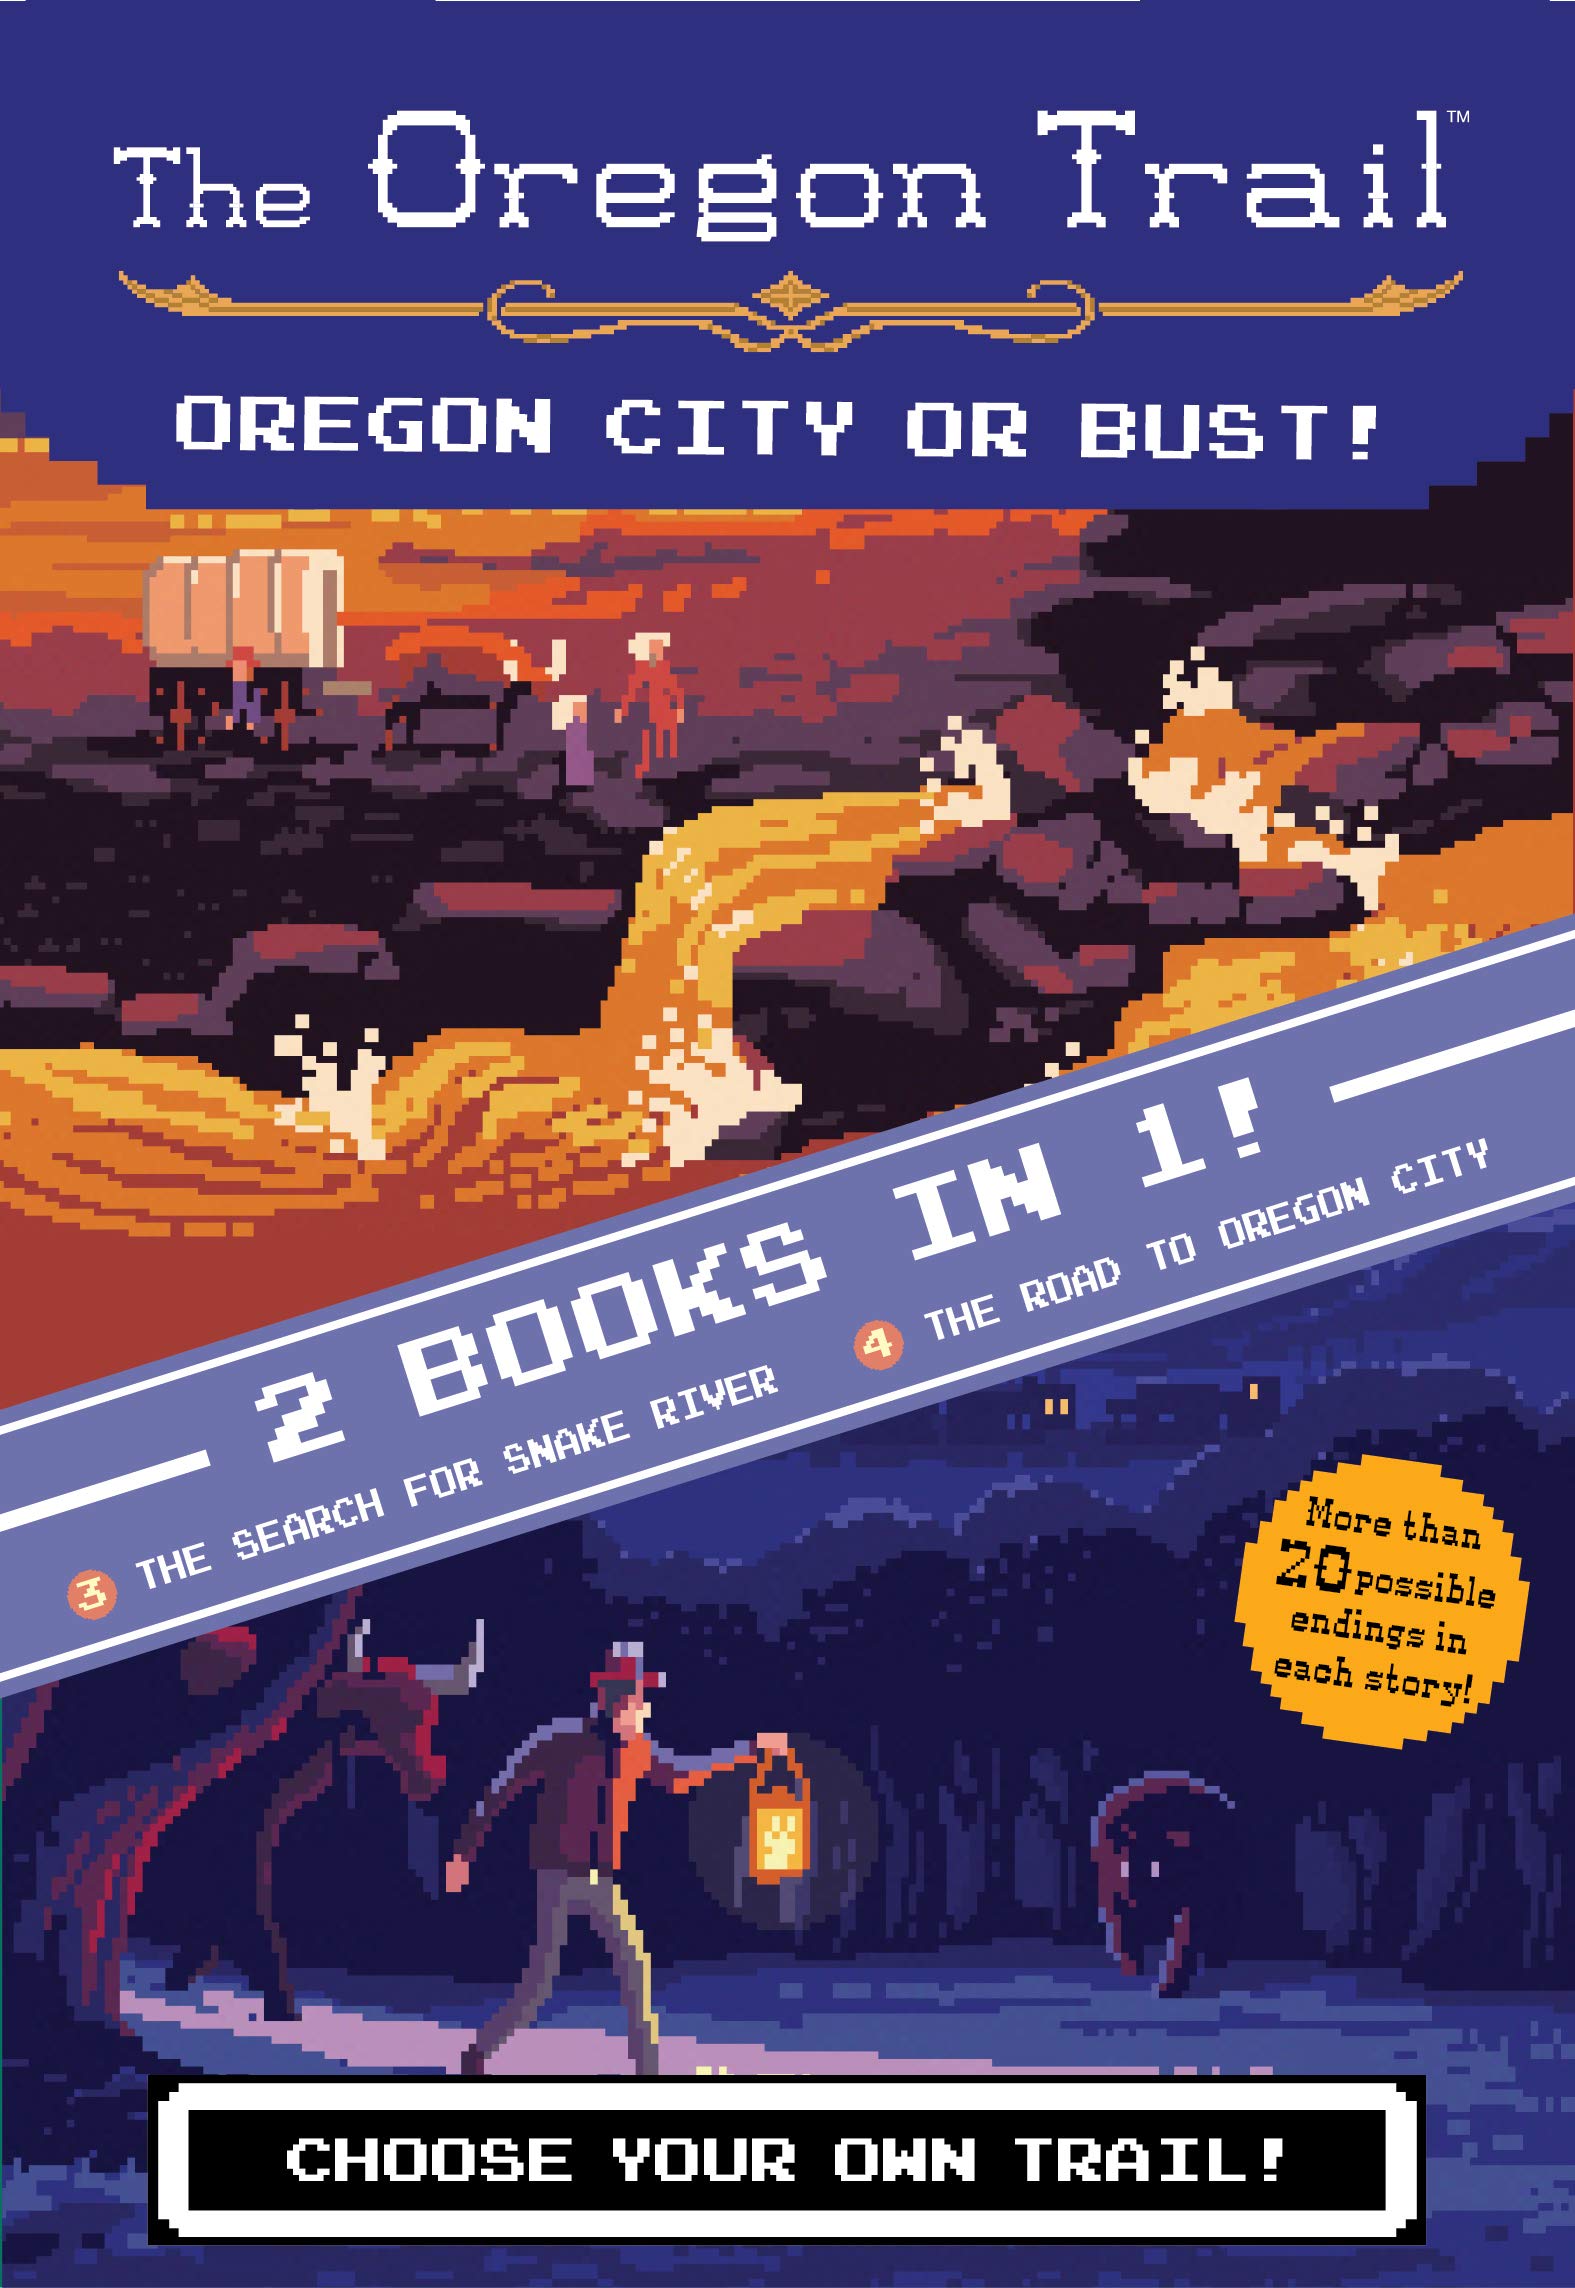 Oregon City or Bust! (Two Books in One): The Search for Snake River and The Road to Oregon City (The Oregon Trail)